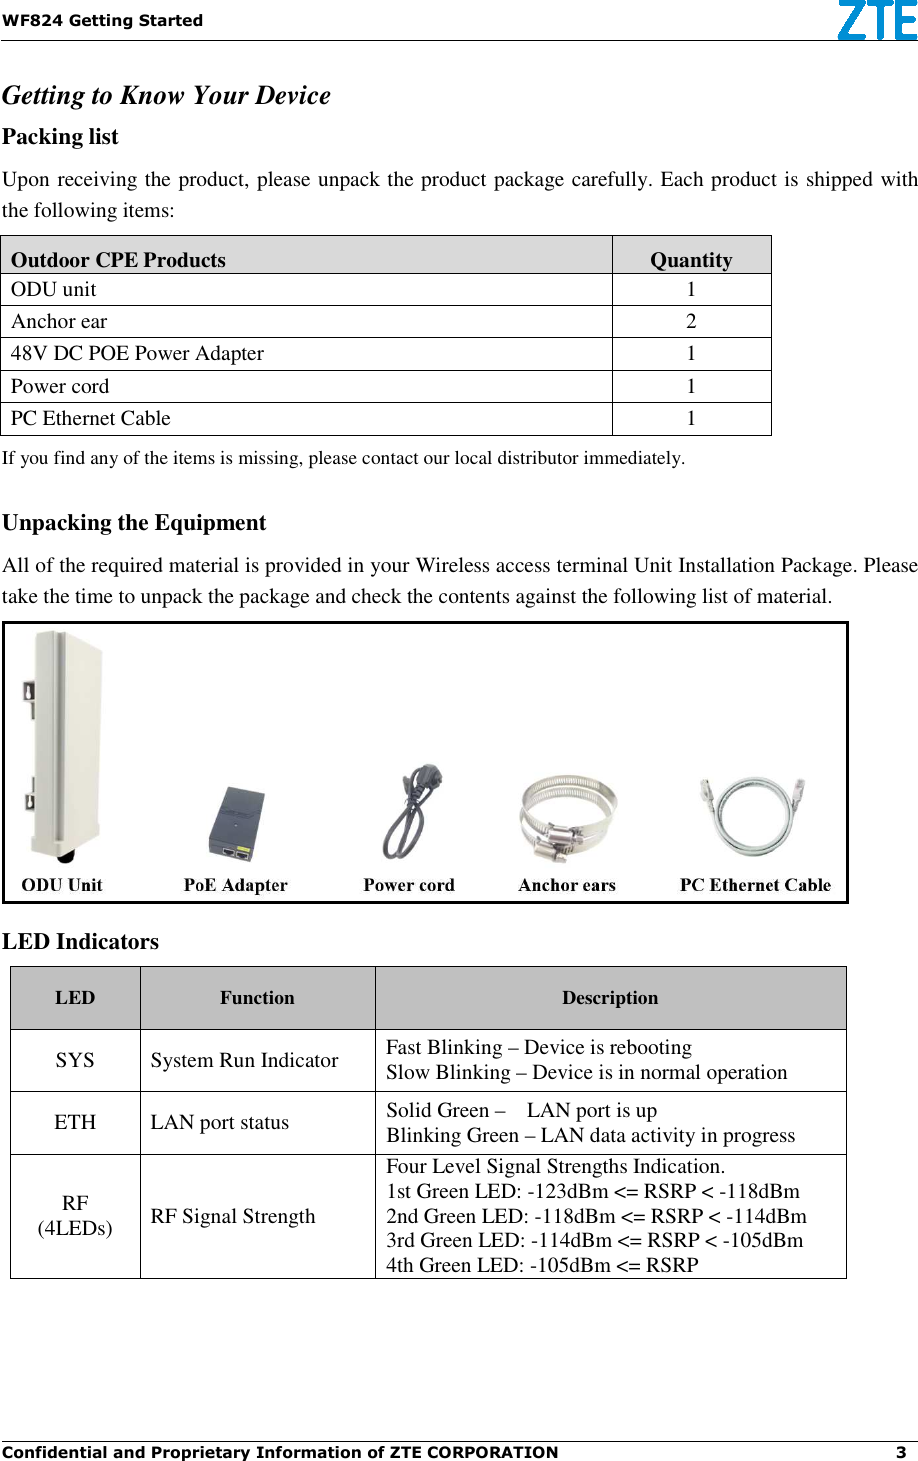 WF824 Getting Started  Confidential and Proprietary Information of ZTE CORPORATION                                                                                      3  Getting to Know Your Device Packing list Upon receiving the product, please unpack the product package carefully. Each product is shipped with the following items:   Outdoor CPE Products  Quantity ODU unit  1 Anchor ear  2 48V DC POE Power Adapter    1 Power cord  1 PC Ethernet Cable  1 If you find any of the items is missing, please contact our local distributor immediately.  Unpacking the Equipment All of the required material is provided in your Wireless access terminal Unit Installation Package. Please take the time to unpack the package and check the contents against the following list of material.    LED Indicators LED    Function  Description SYS  System Run Indicator  Fast Blinking – Device is rebooting Slow Blinking – Device is in normal operation       ETH  LAN port status  Solid Green –    LAN port is up Blinking Green – LAN data activity in progress RF (4LEDs)  RF Signal Strength Four Level Signal Strengths Indication. 1st Green LED: -123dBm &lt;= RSRP &lt; -118dBm 2nd Green LED: -118dBm &lt;= RSRP &lt; -114dBm 3rd Green LED: -114dBm &lt;= RSRP &lt; -105dBm 4th Green LED: -105dBm &lt;= RSRP 